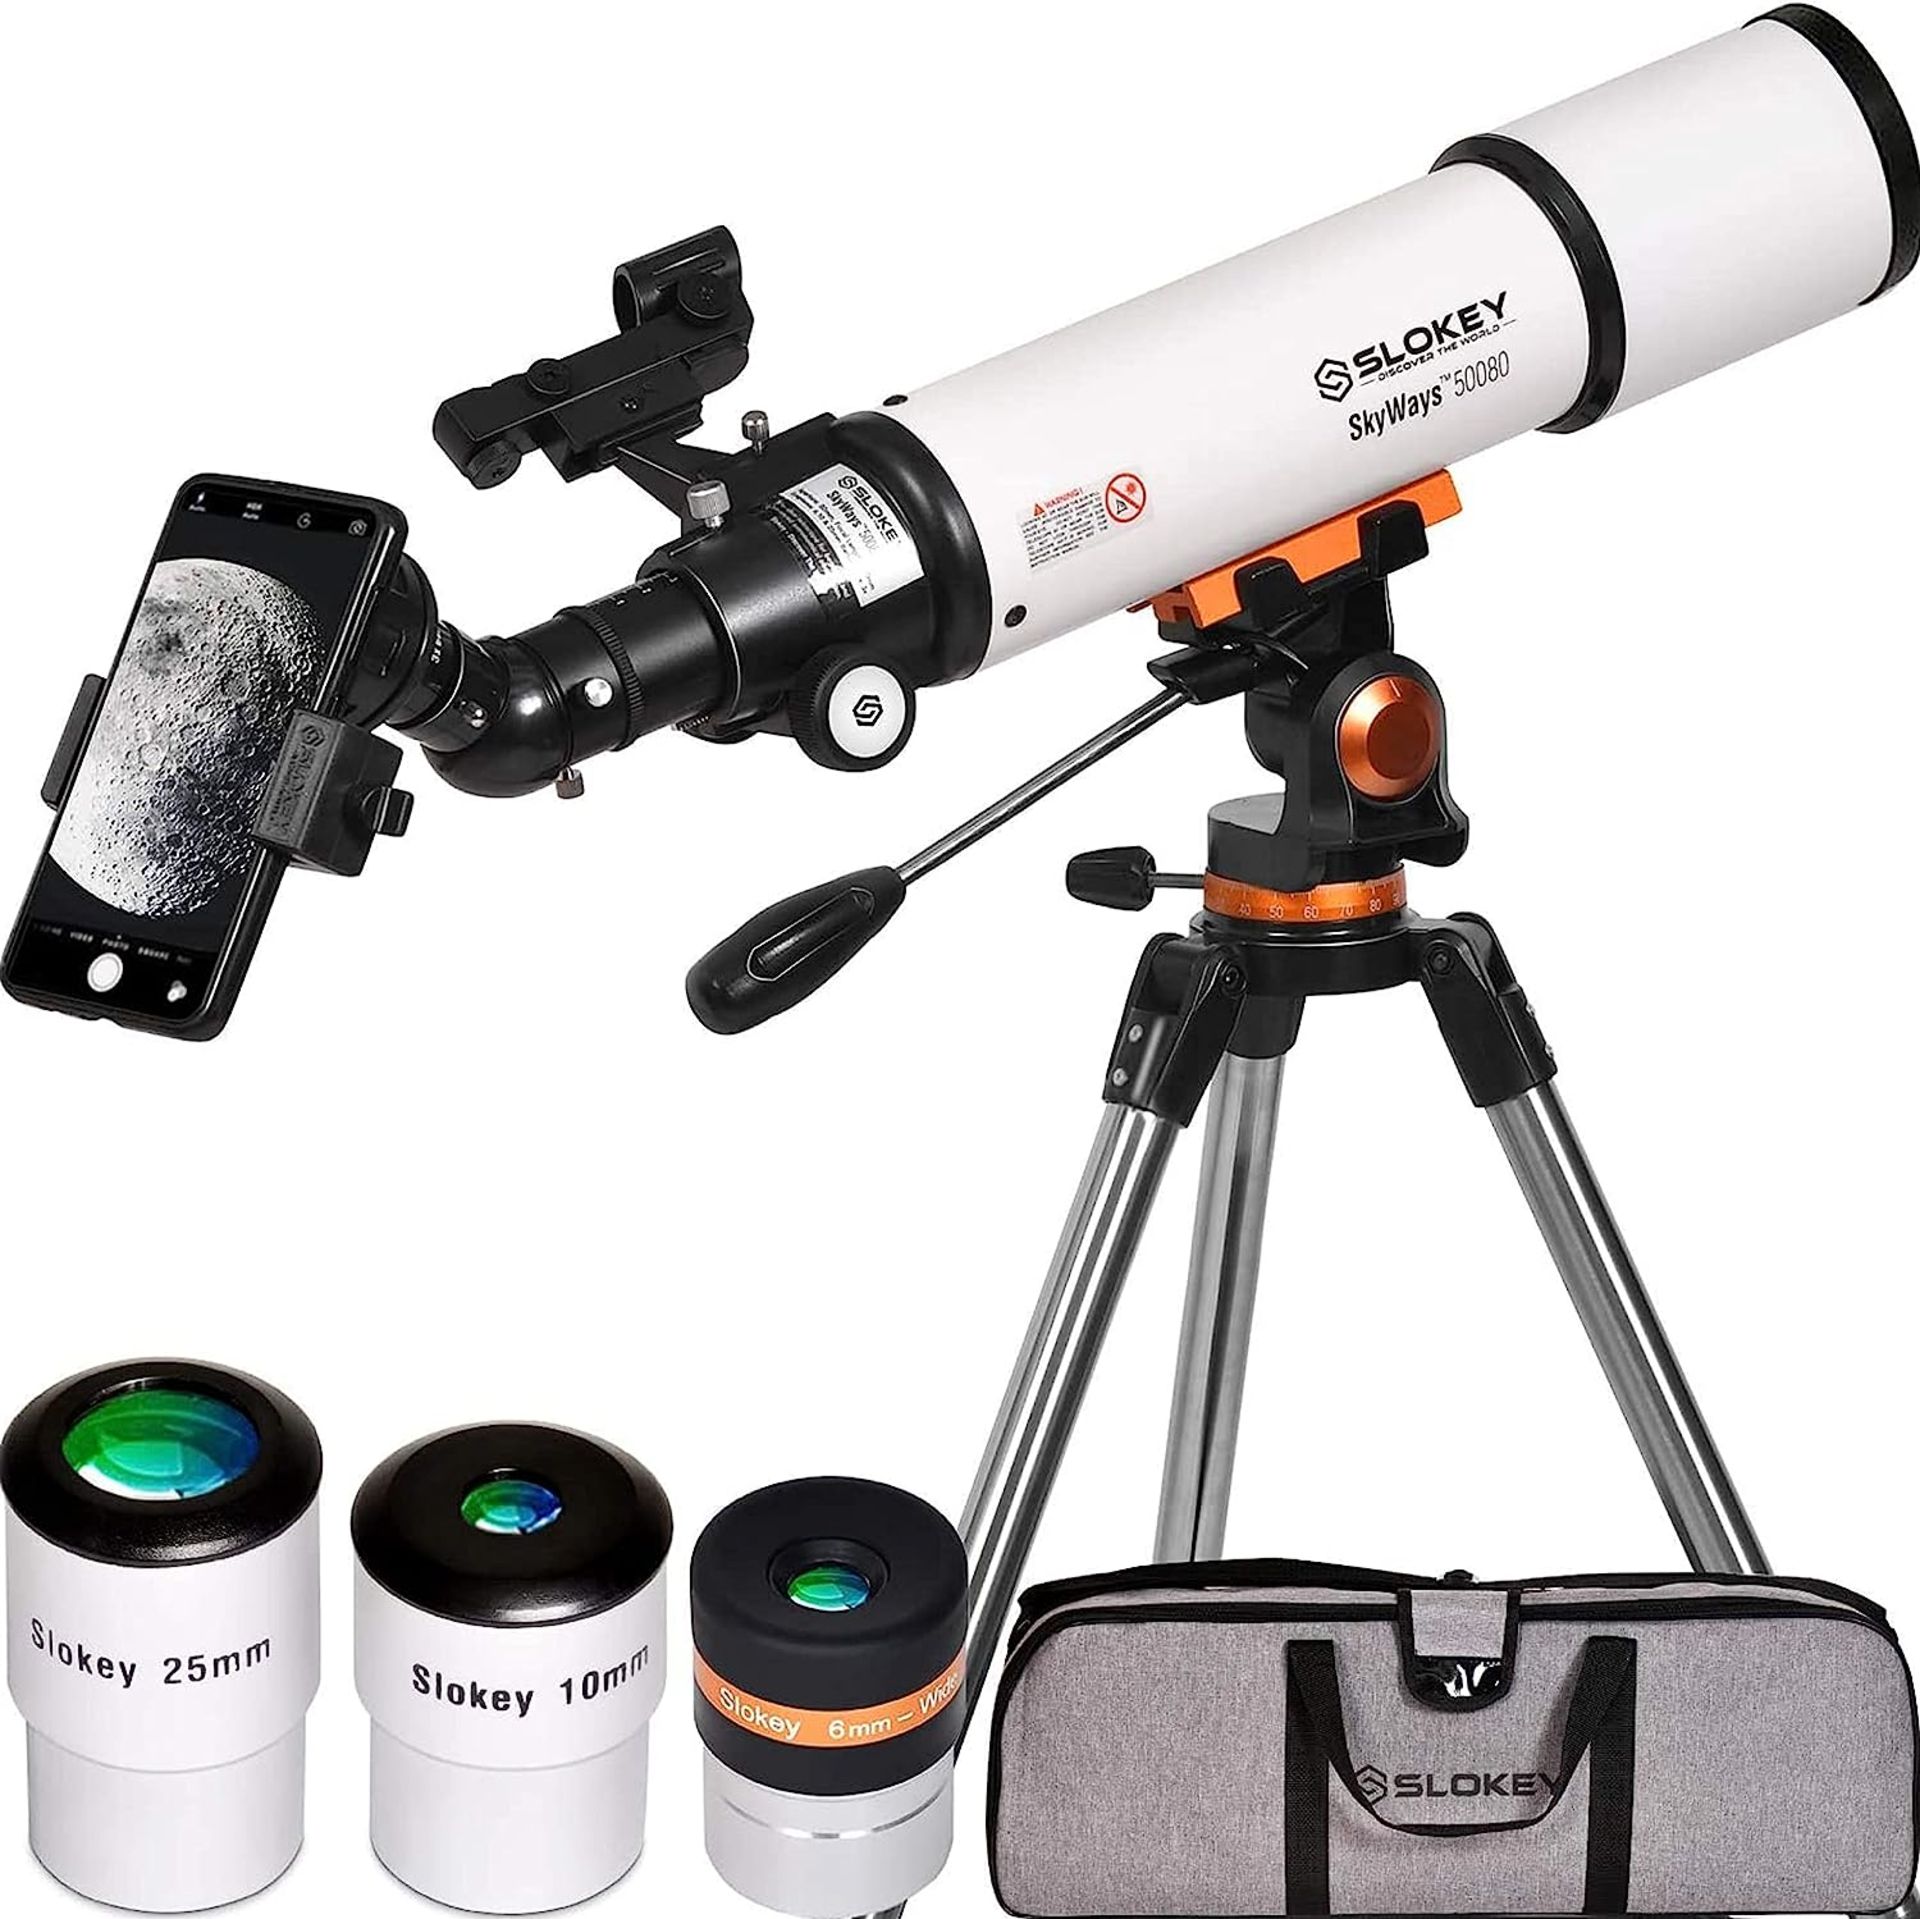 Slokey 50080 Skyways Astronomy Telescope Accessories (AS NEW HOWEVER UNBOXED) - AMAZON RRP £277.49! - Image 2 of 7